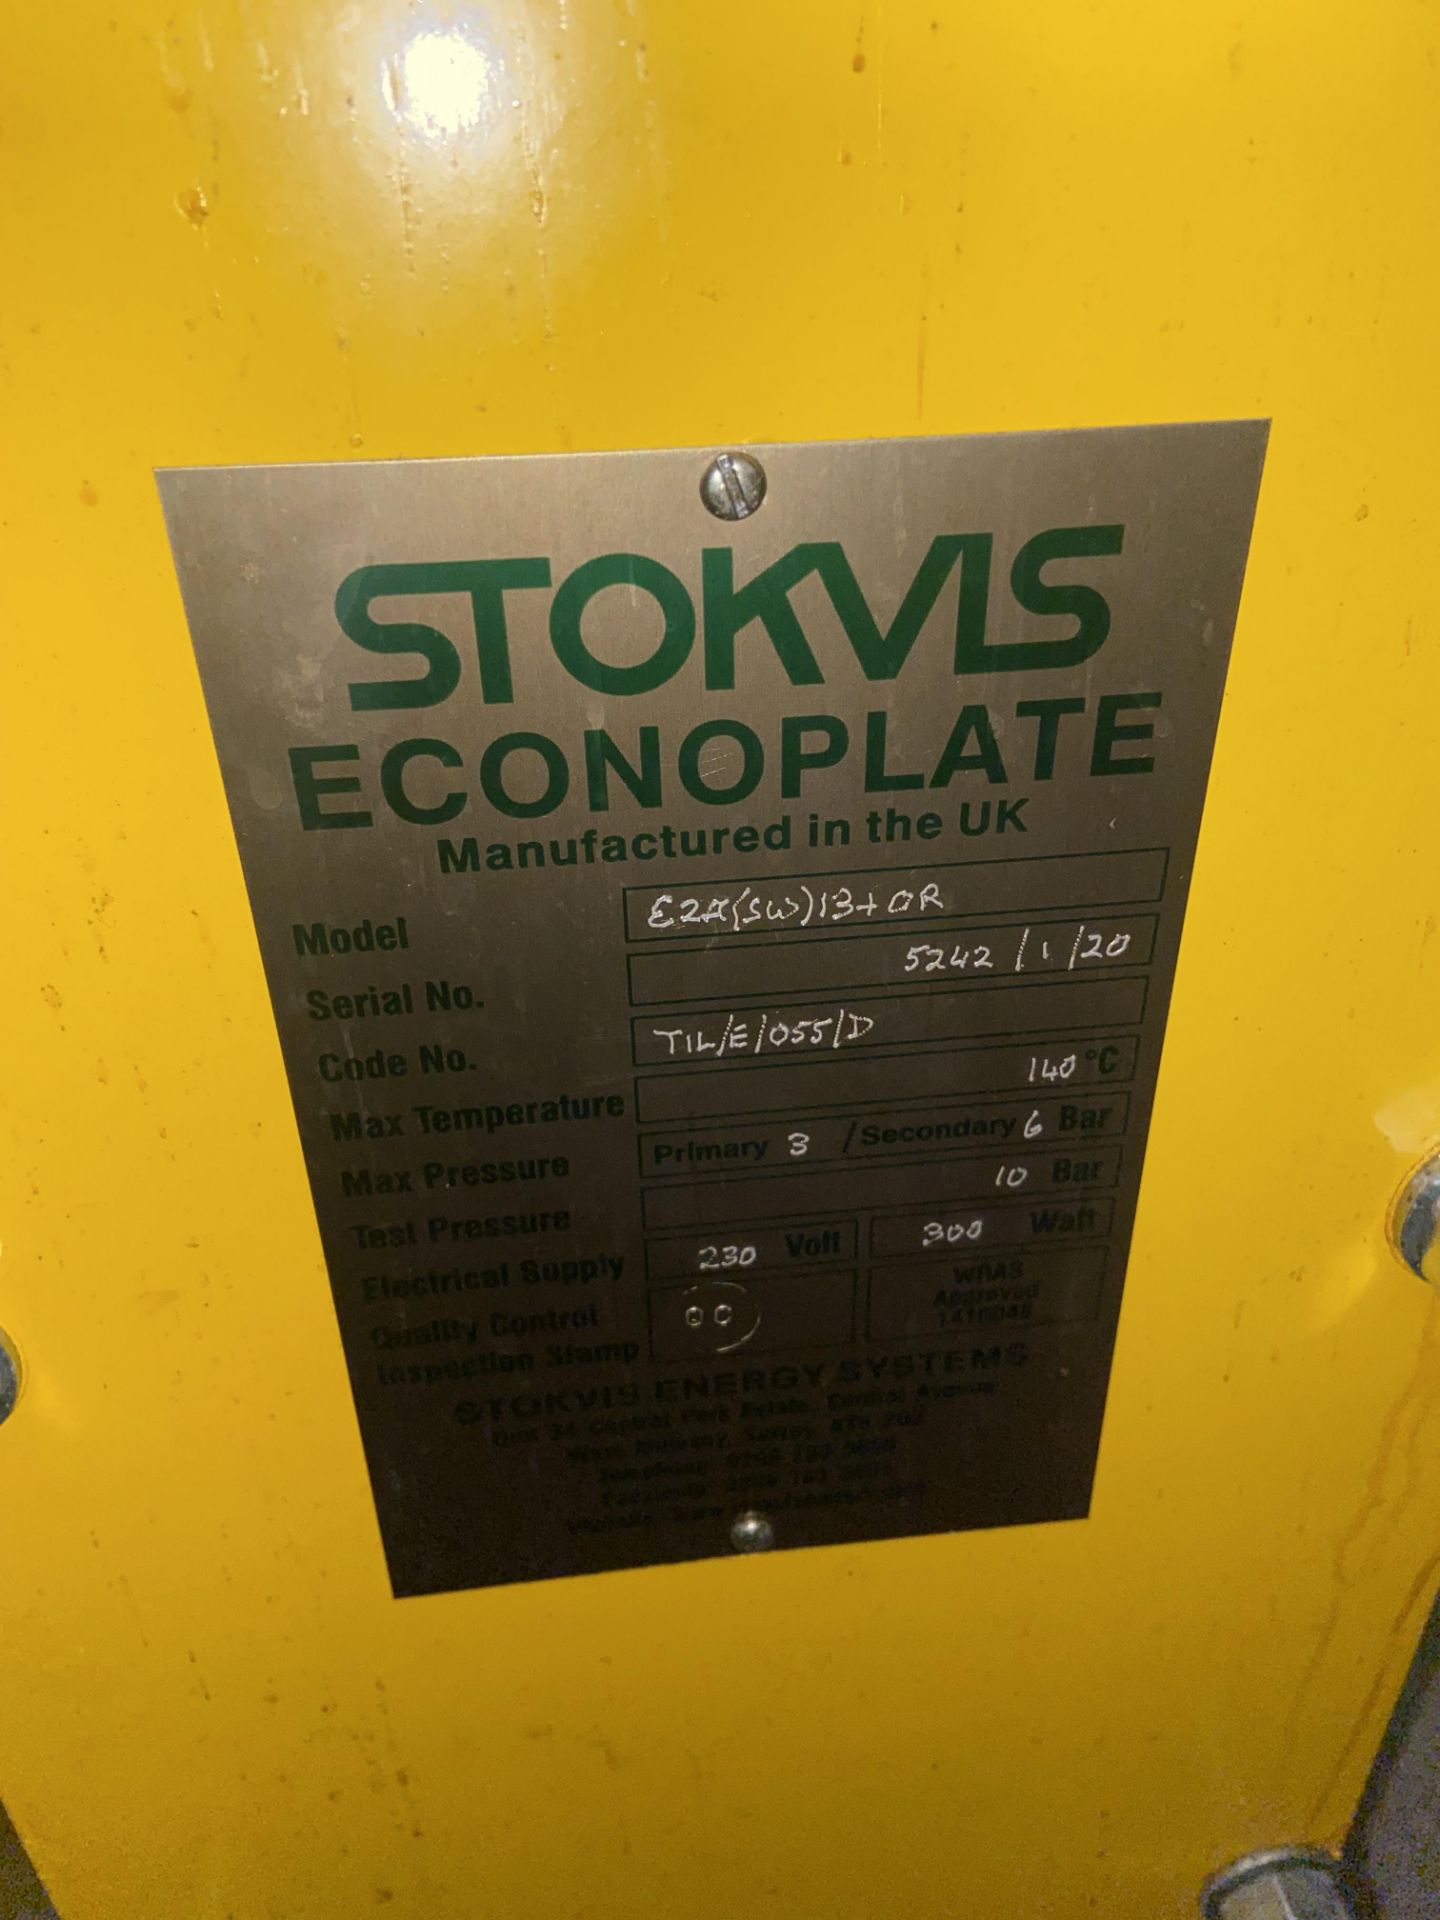 Stokvis Econoplate E24 (SW) 13+0R Plate Heat Exchanger, serial no. 5242/1/20, 230V, primary 3/ - Image 4 of 4